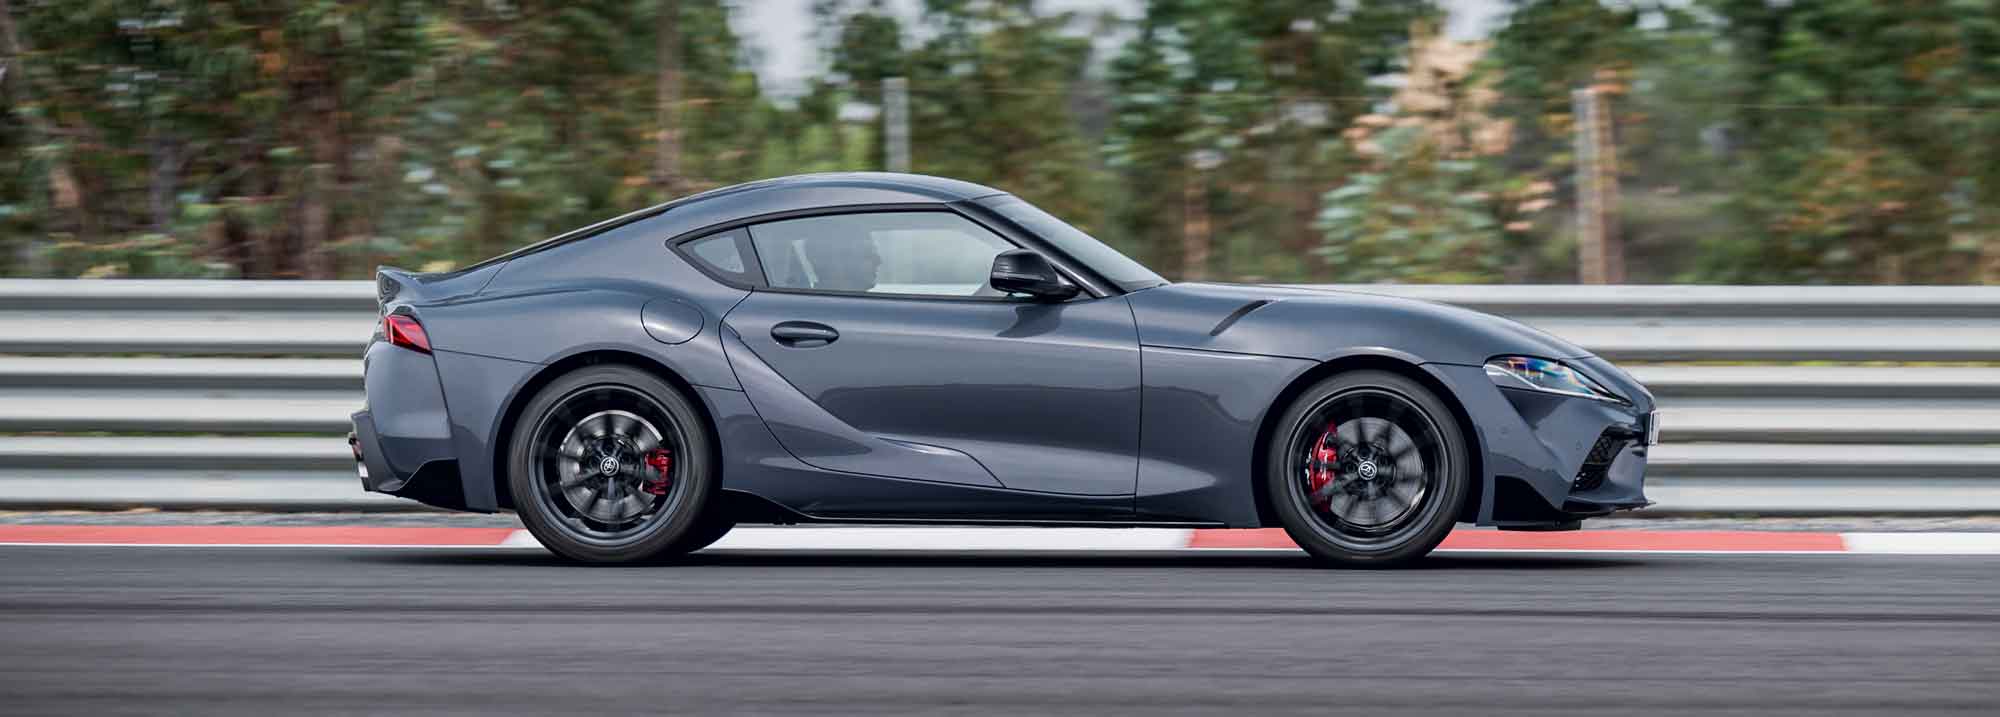 Toyota launches GR Supra manual